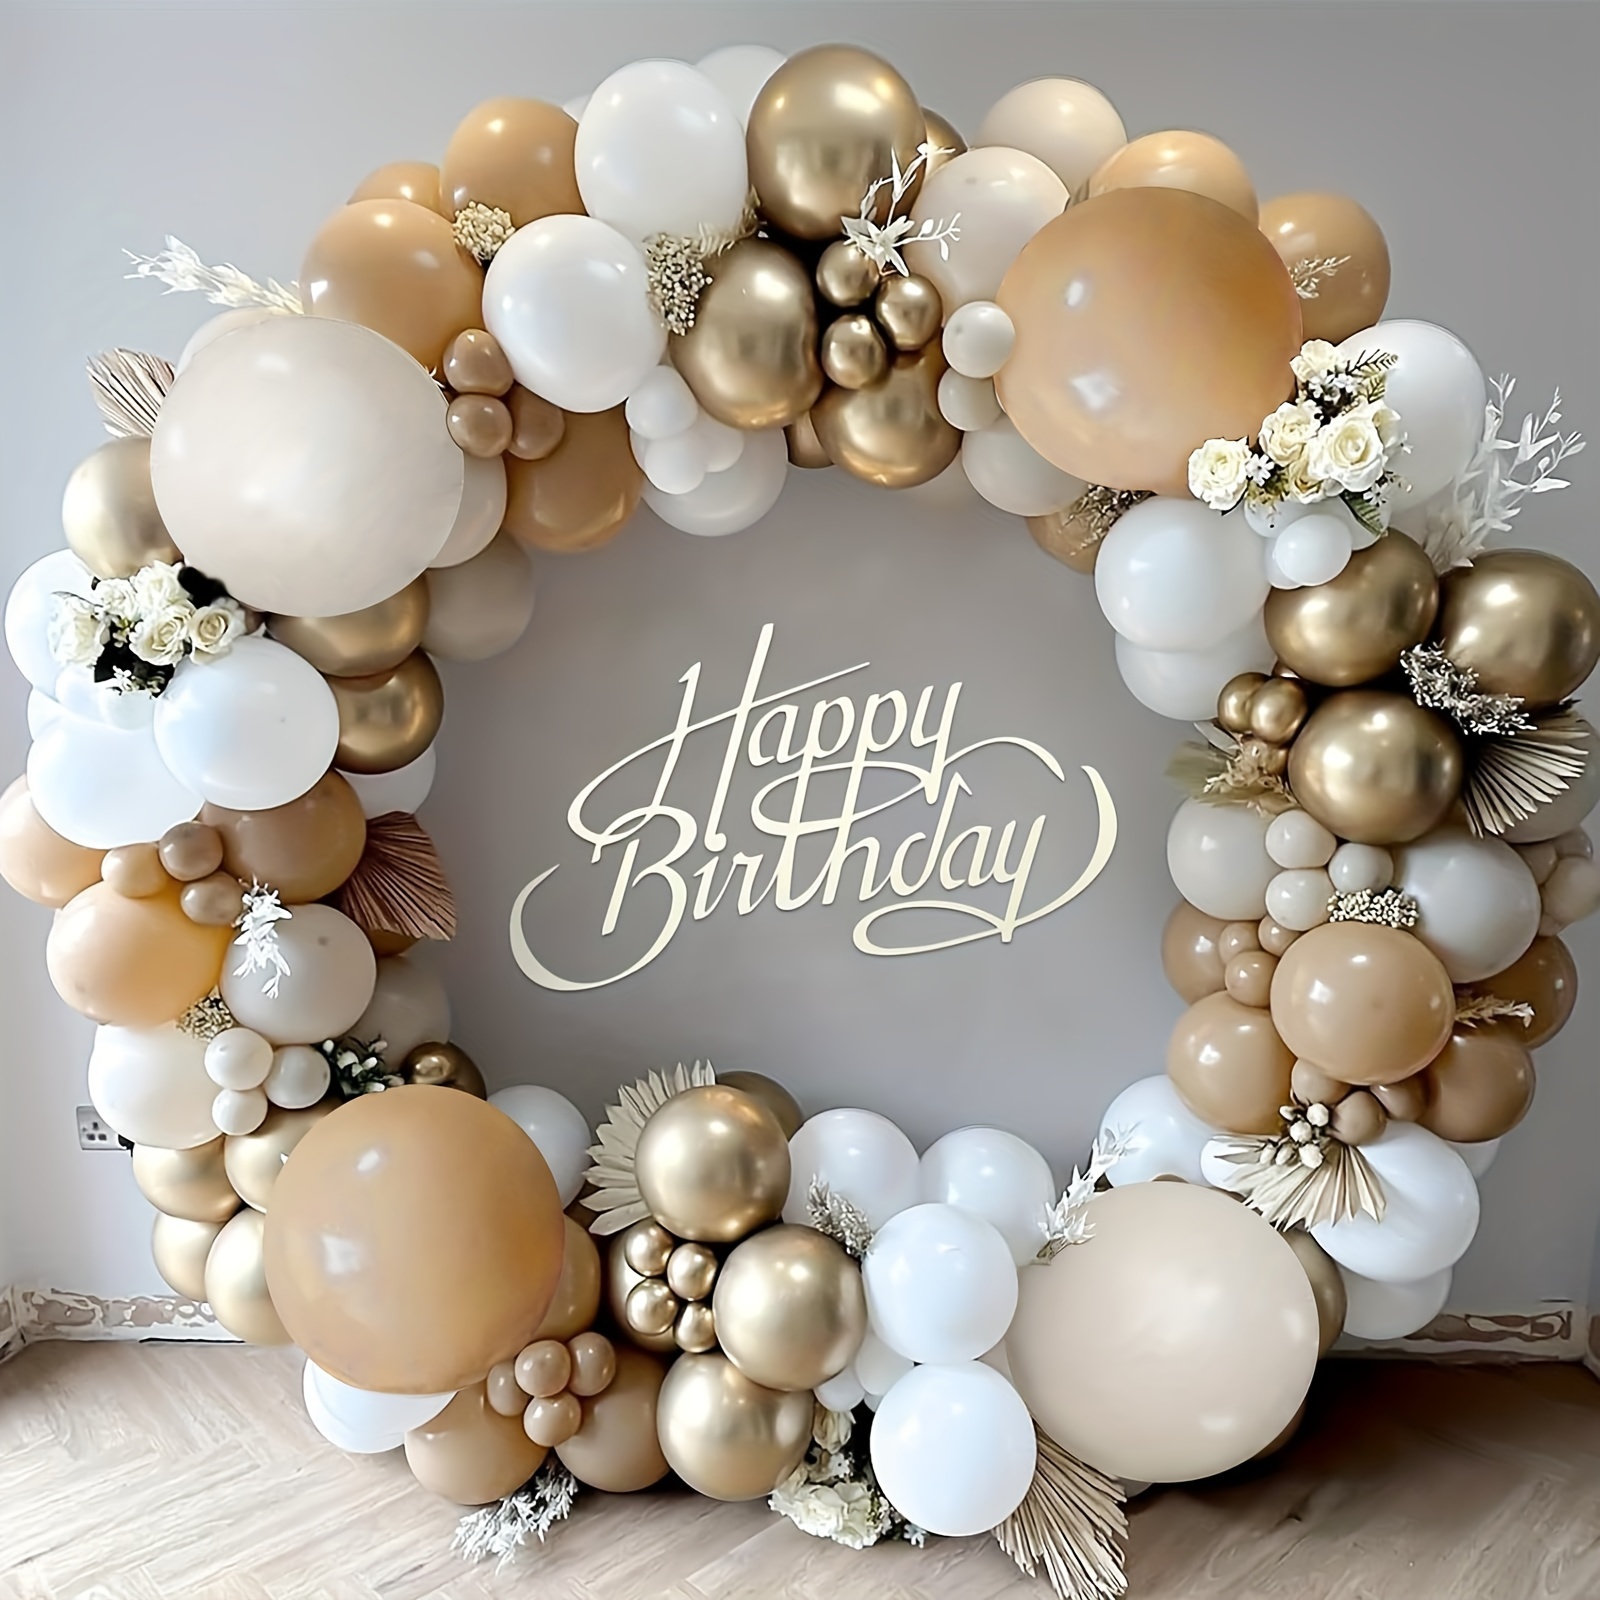 

153-piece Elegant Brown, Nude & Golden Latex Balloon Set - Perfect For Weddings, Birthdays, Anniversaries, Graduations, Baptisms & More - Versatile Party Decorations For All Occasions